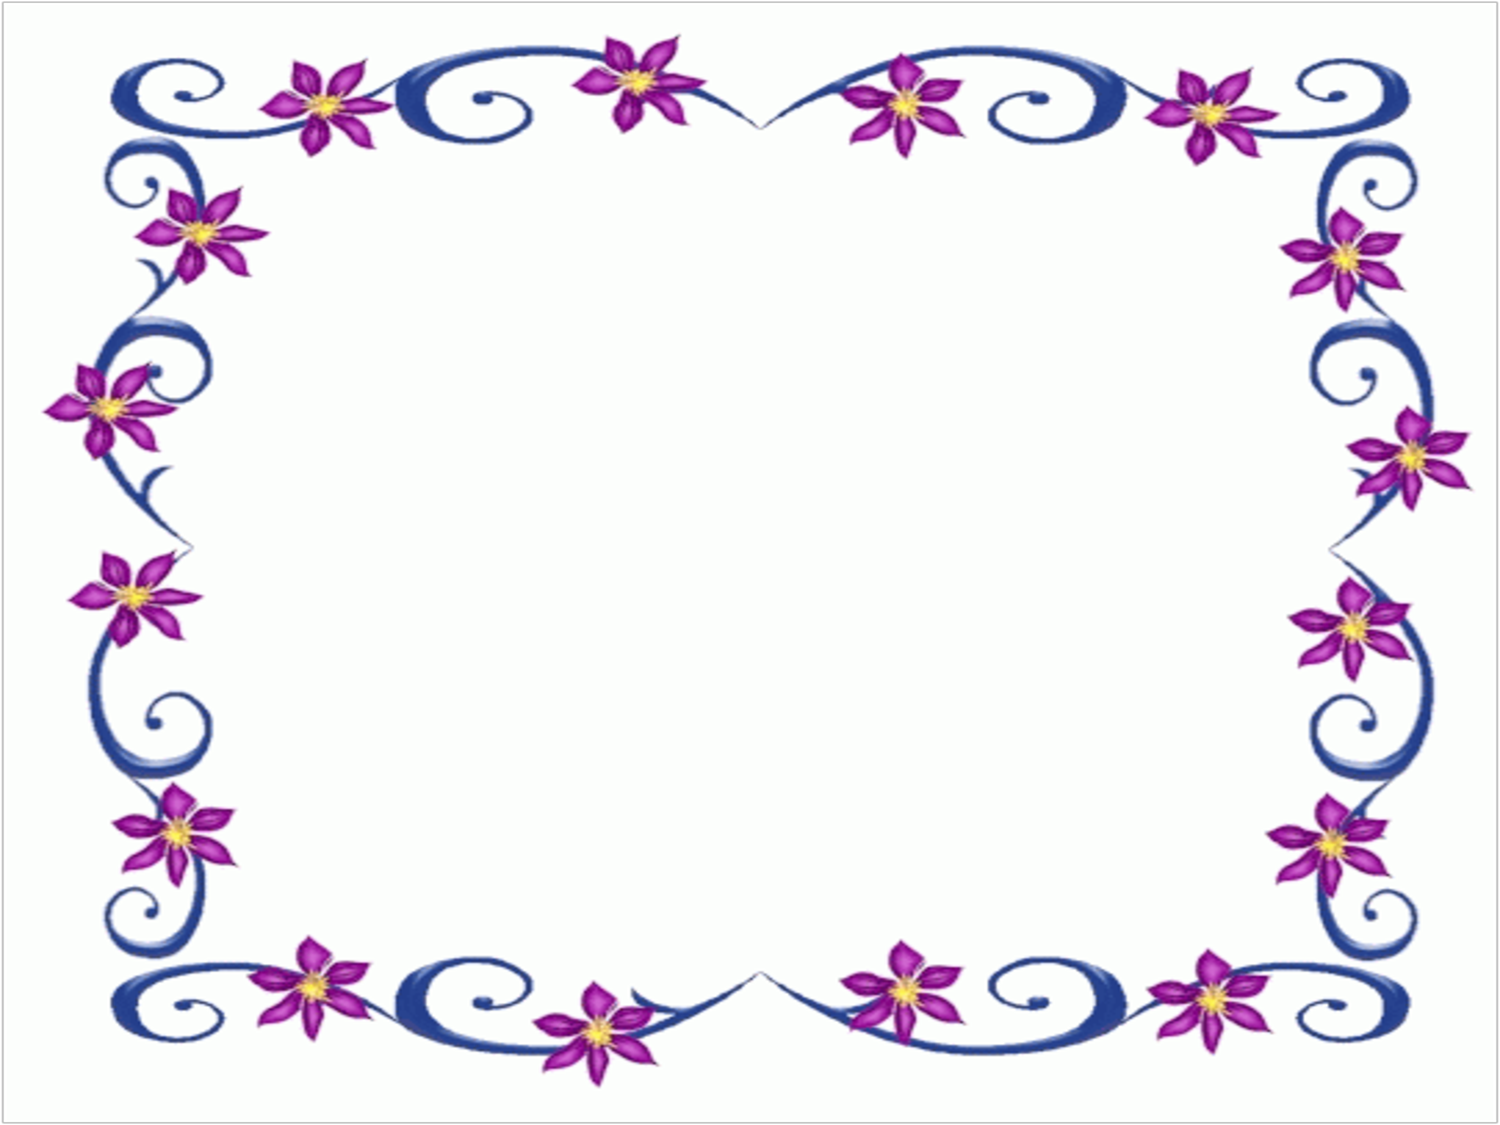 Certificate Borders Templates - Clipart library